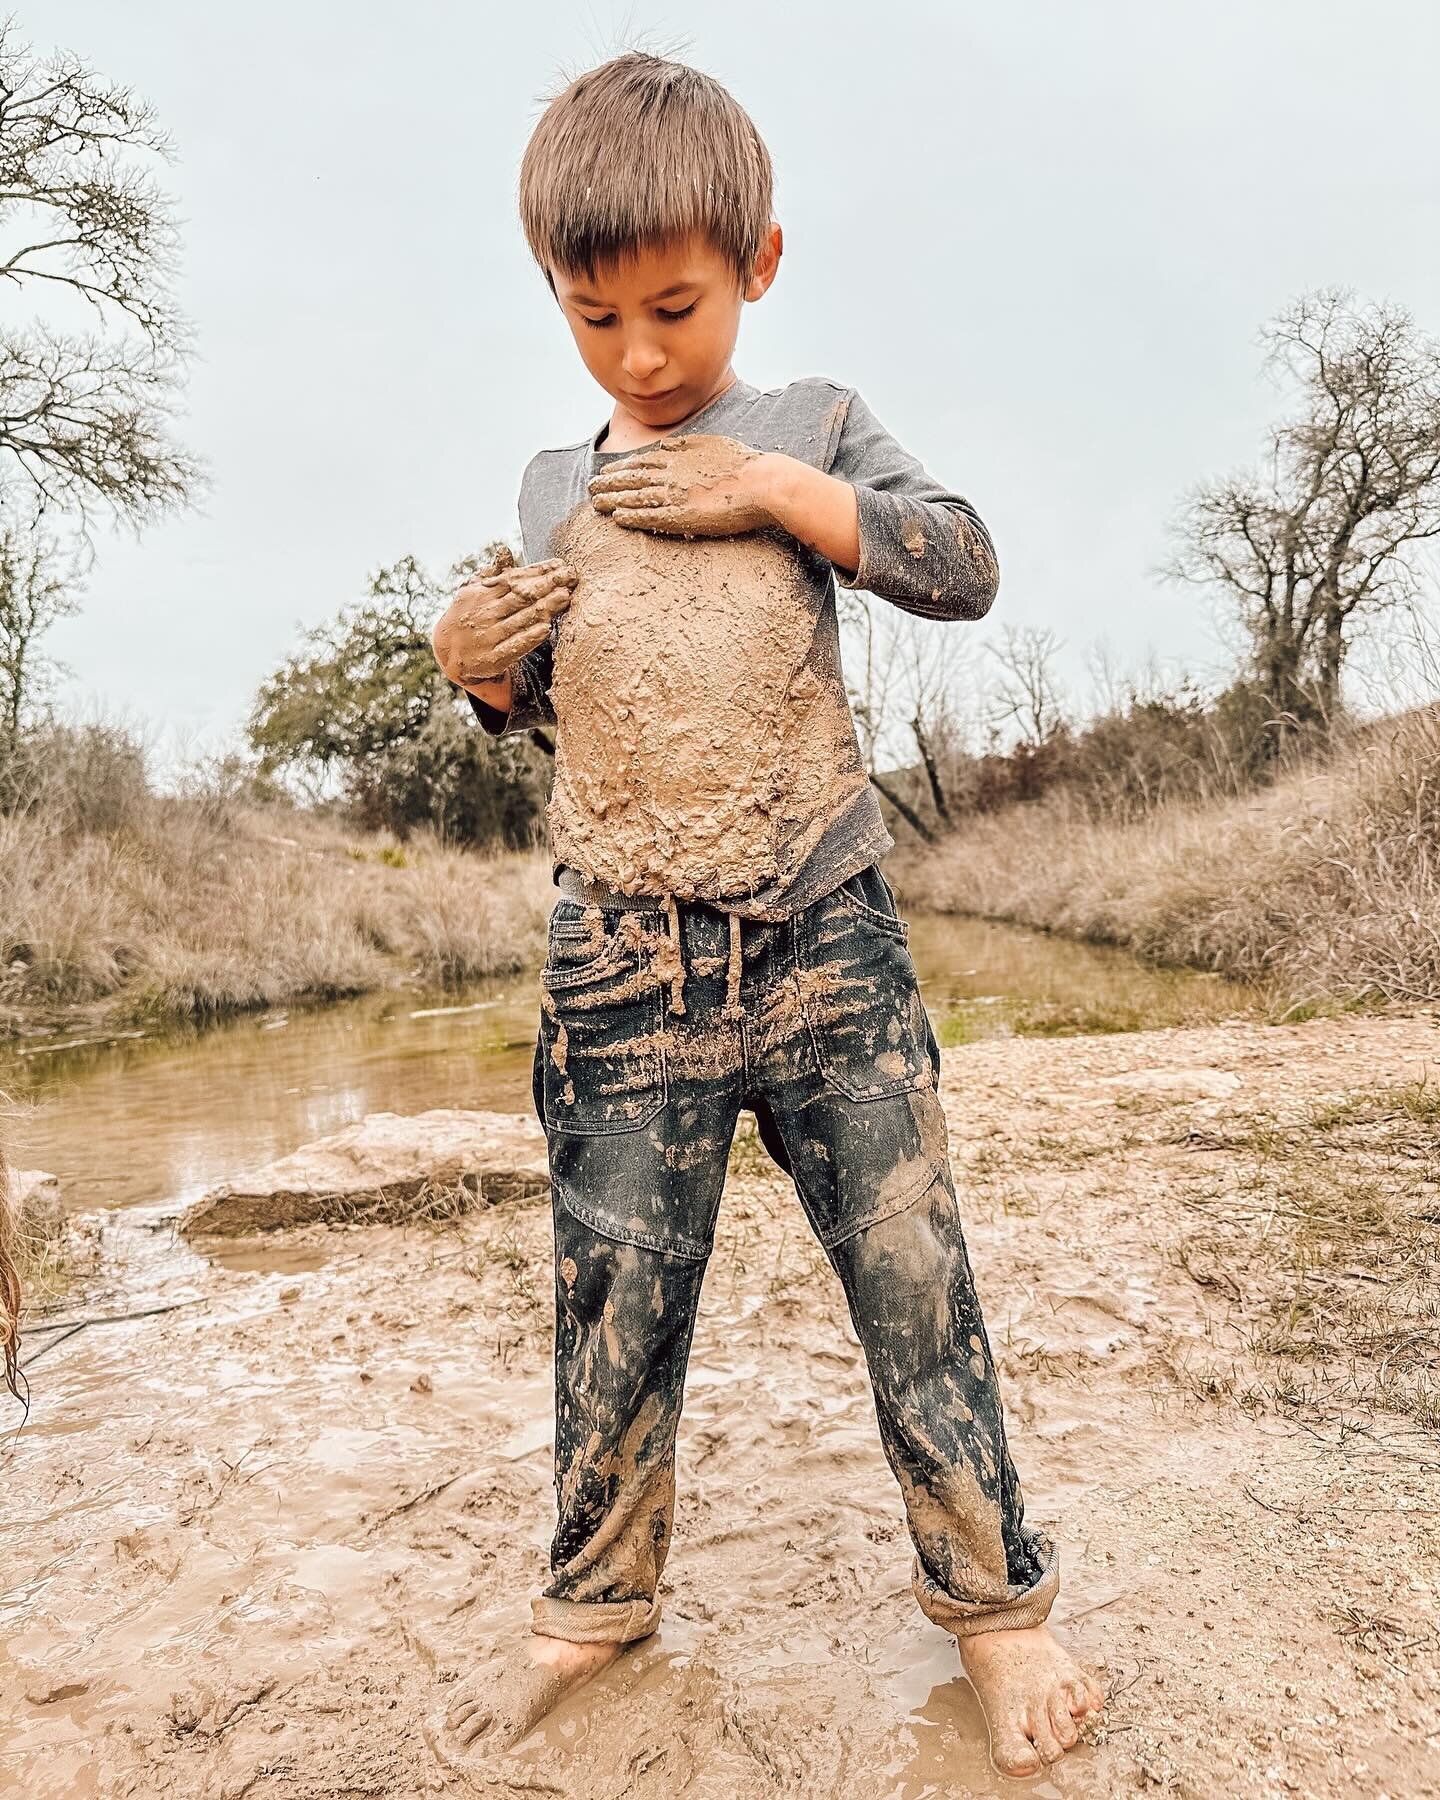 Me: &ldquo;What are you doing?&rdquo;

Dominic: &ldquo;I just want to see if our washing machine can handle all this mud.&rdquo;

That was not the response I was expecting. 😆

Tips: When going on an adventure.  Always pack a wet bag &amp; towels.  T